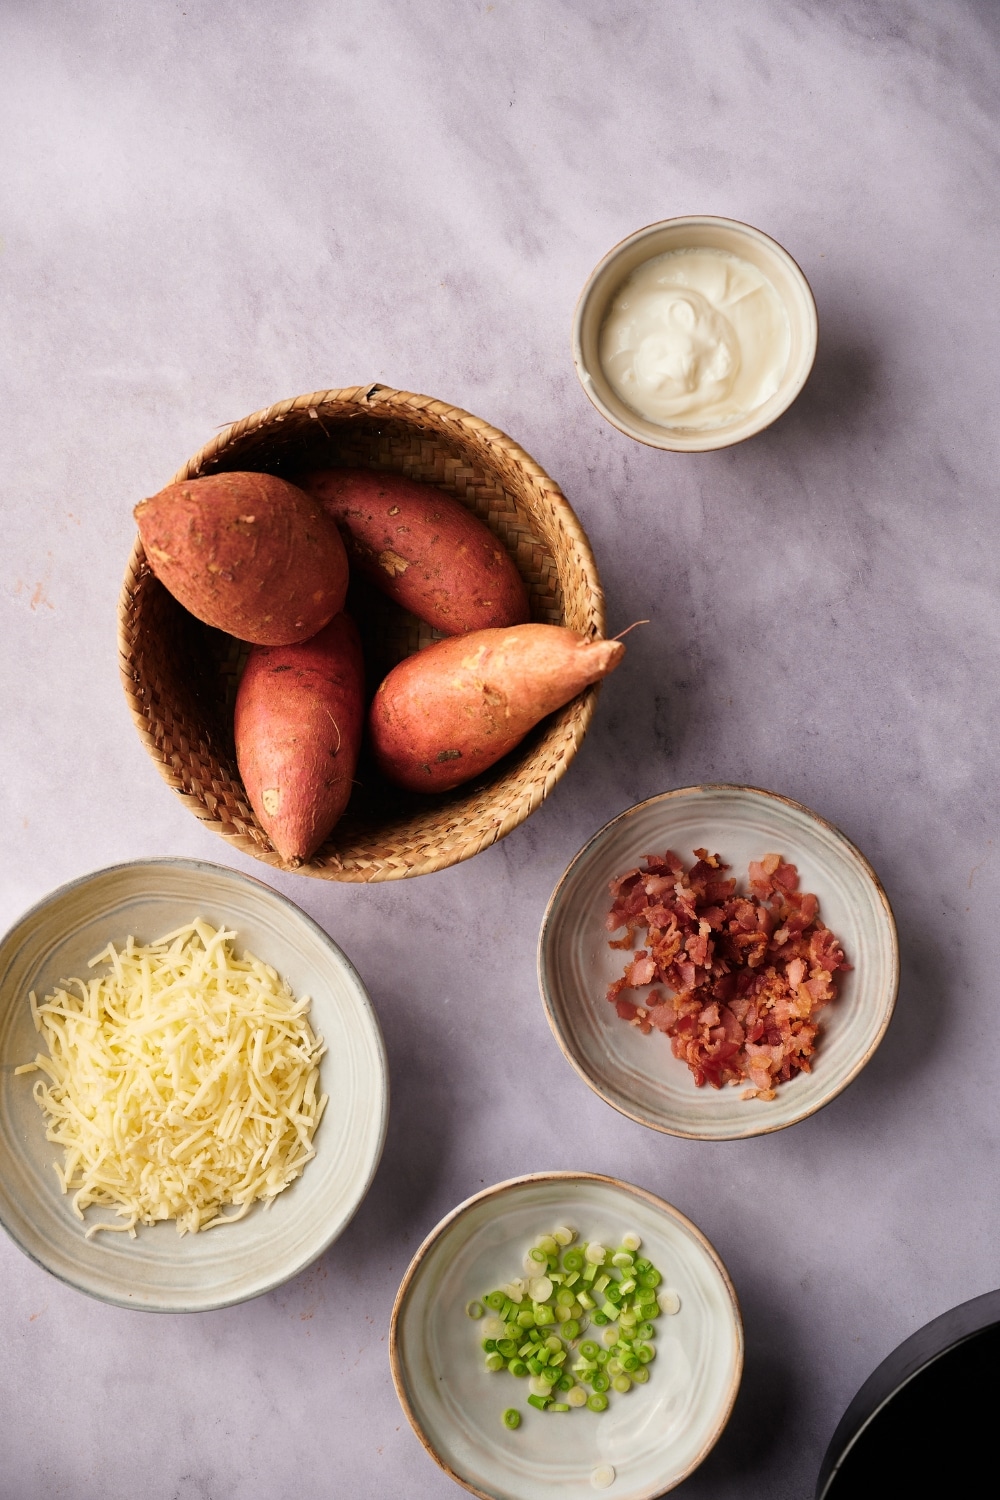 A woven rattan bowl with for sweet potatoes and small ecru bowls of shredded mozzarella cheese, chopped green onions, bacon bits, and sour cream.